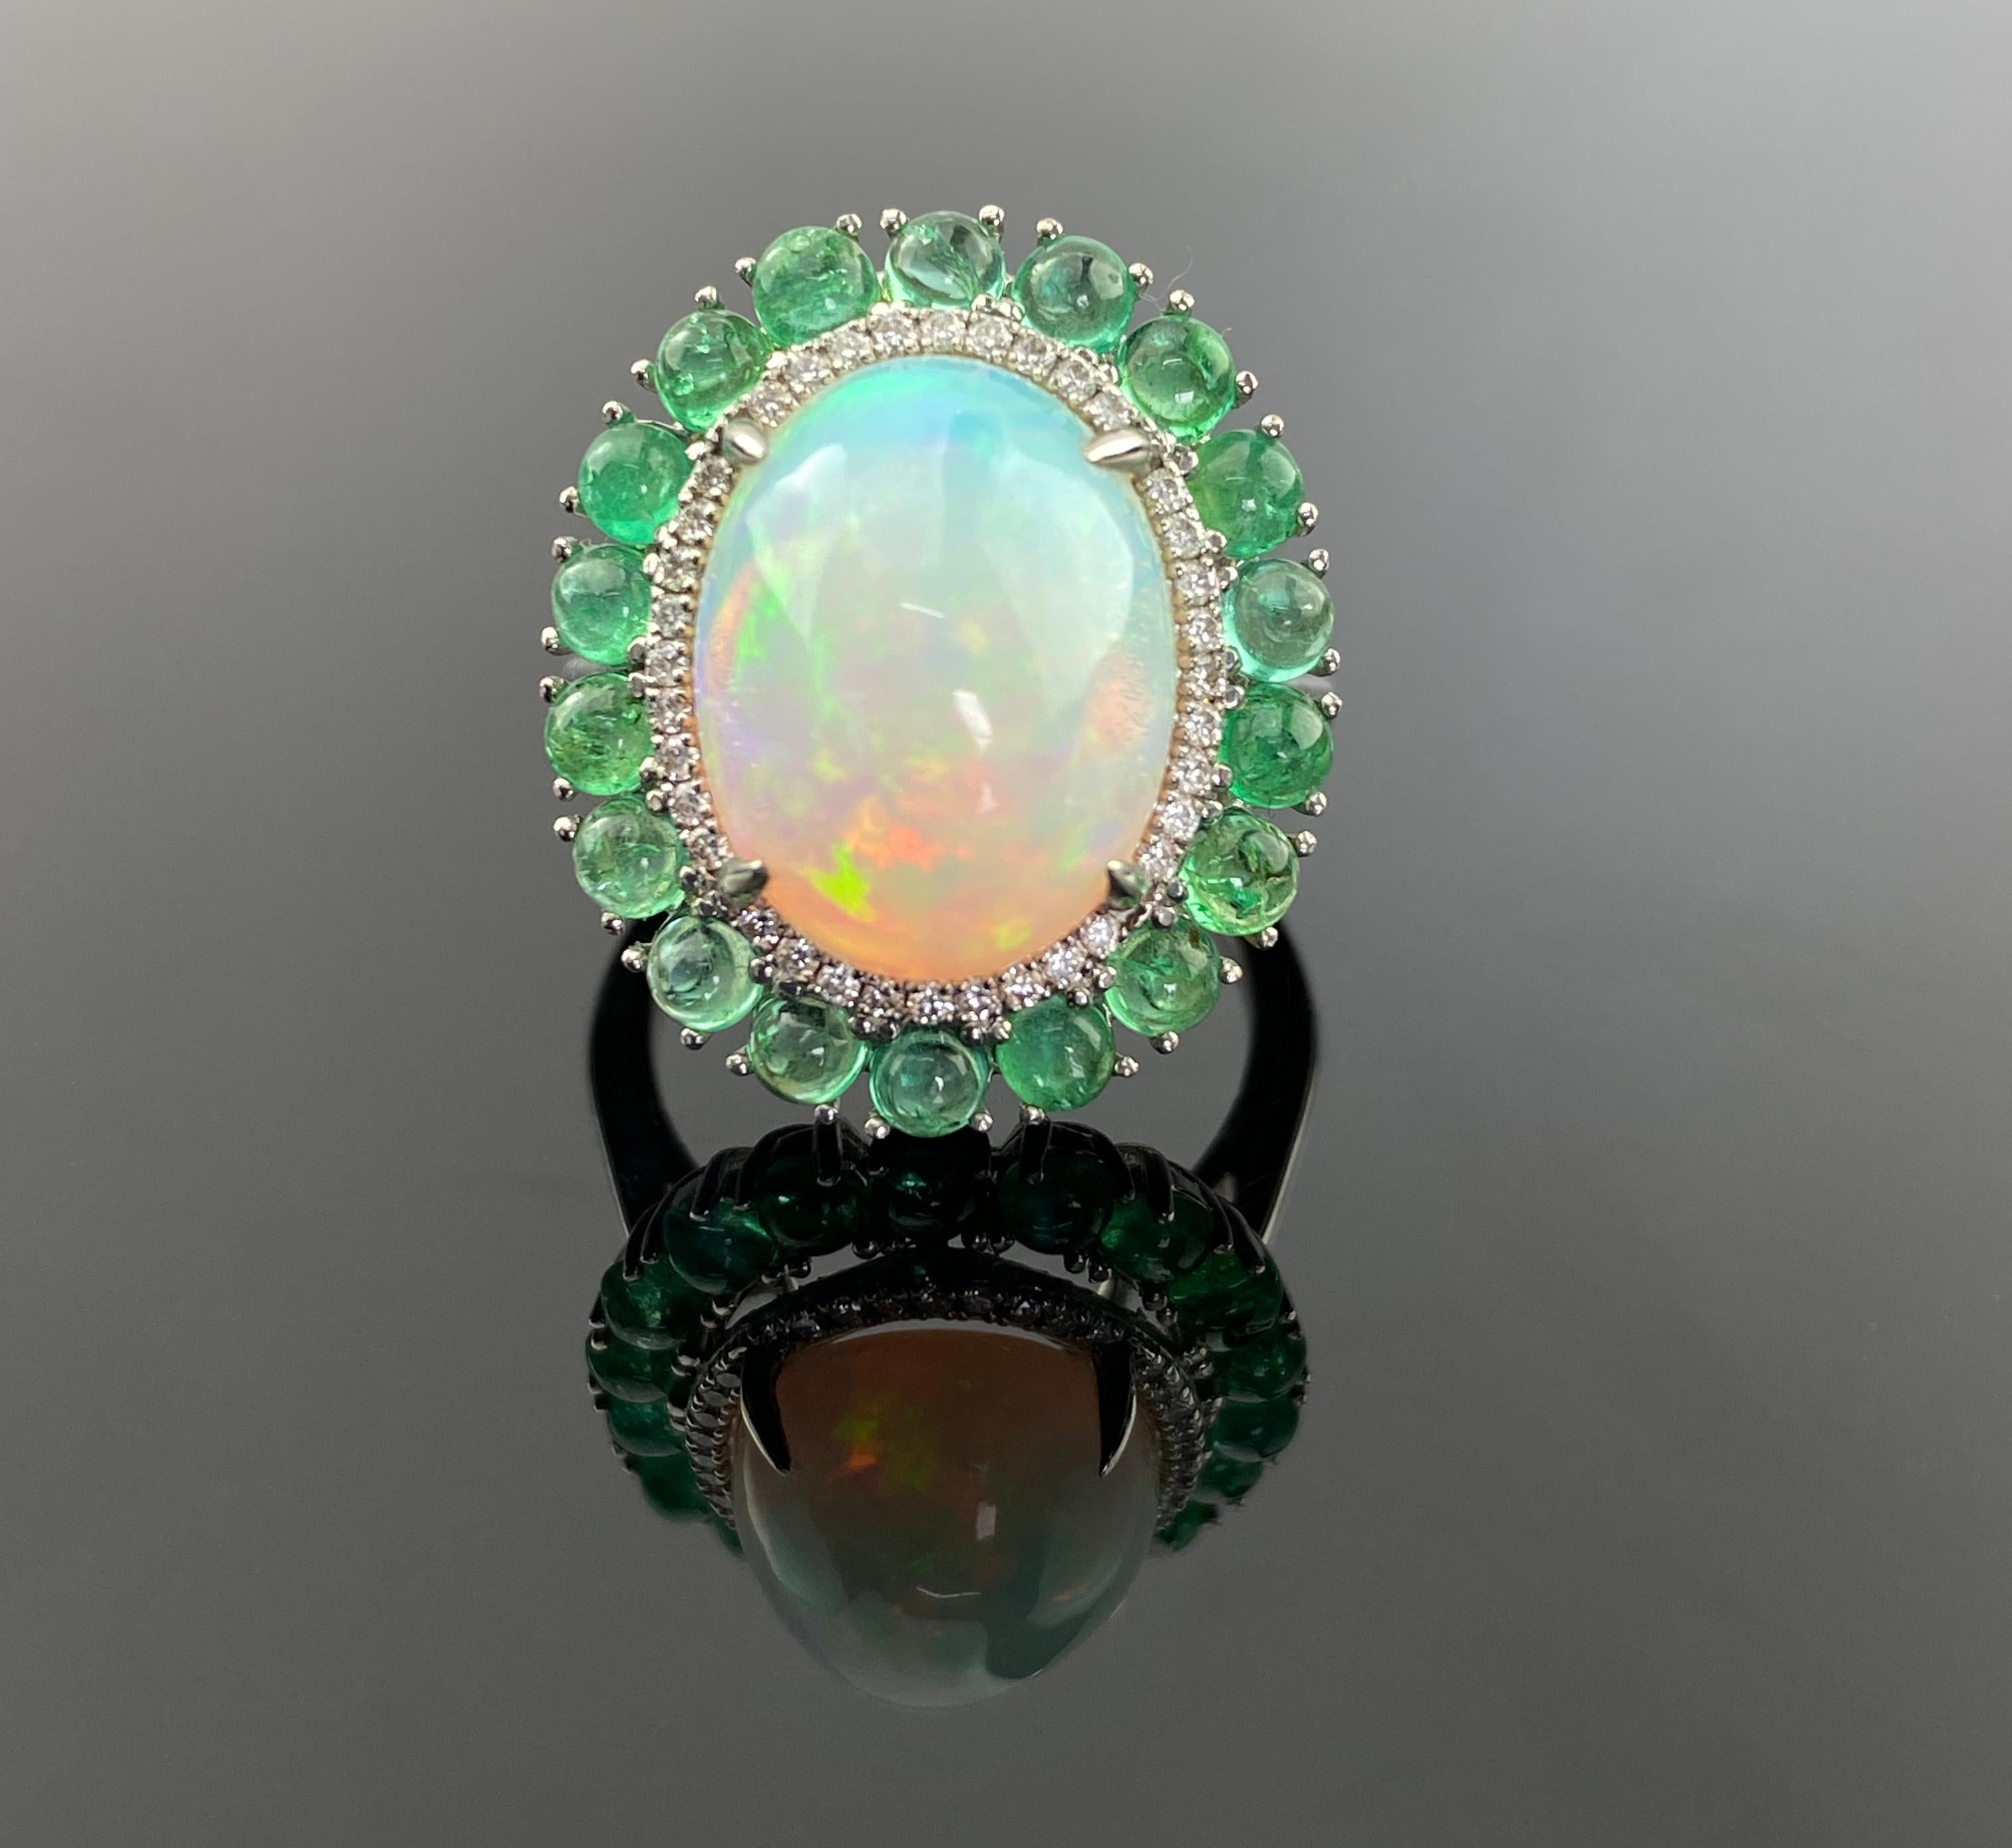 A statement Opal and Colombian Emerald cabochon cocktail ring, with White Diamonds. This enchanting ring combines the lush green of emerald with the captivating beauty of an oval-shaped opal at its heart. 

Details:

18K Gold - 8.13 Grams 
Diamond